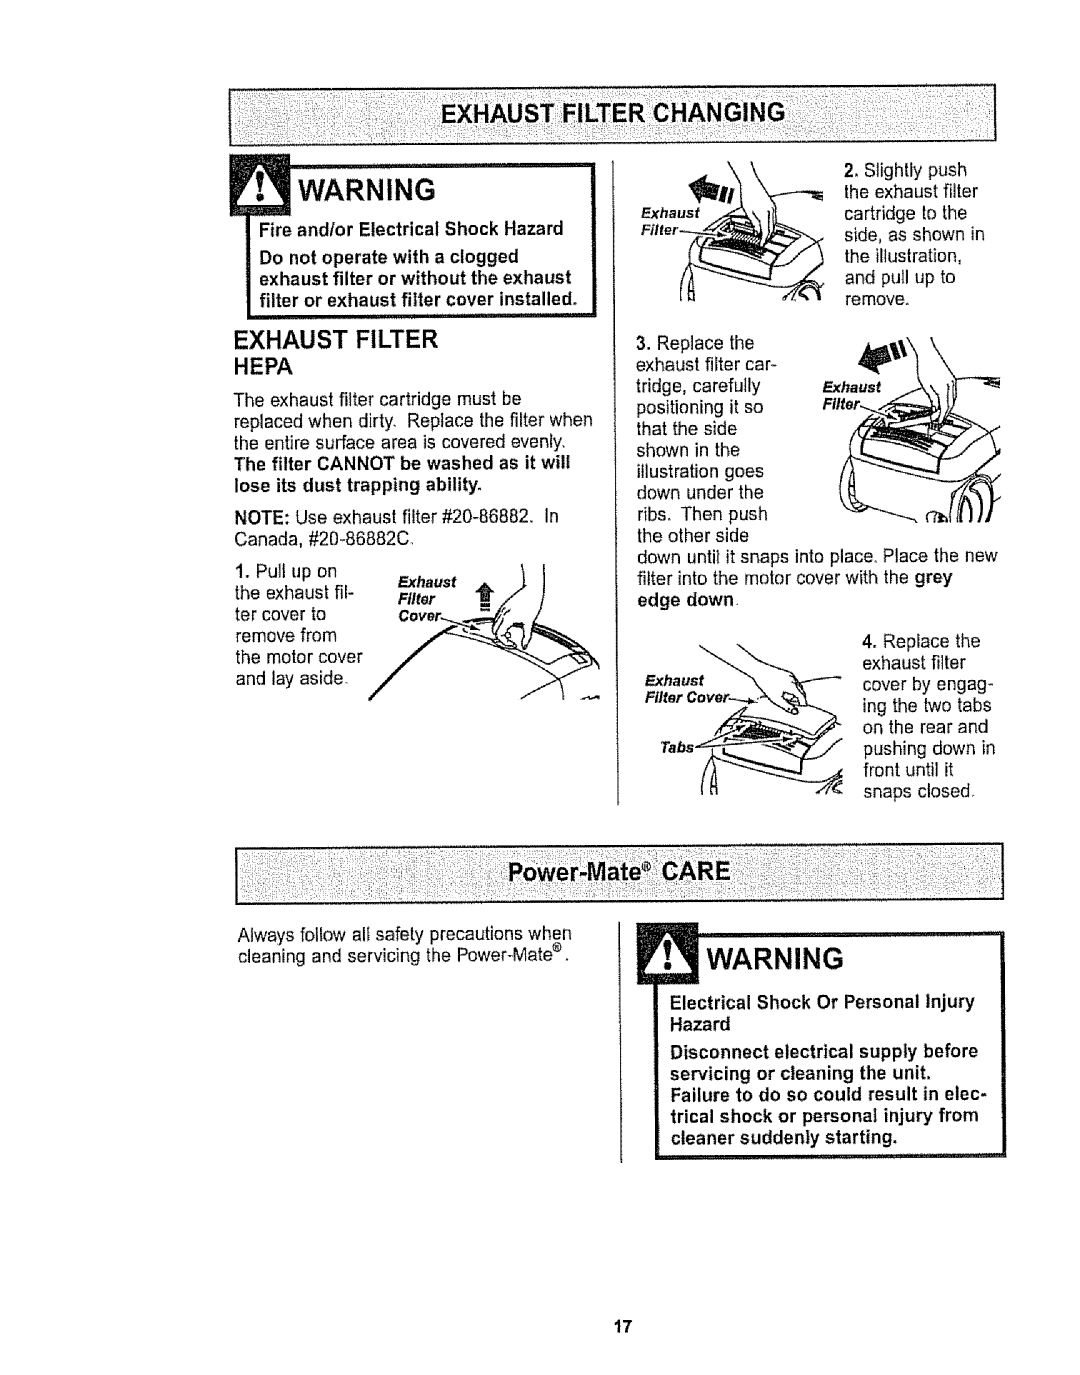 Kenmore 116.29912 owner manual q=, Exhaust Filter, Hepa, Fire and/or Electrical Shock Hazard, _,,,_, illustration goes 